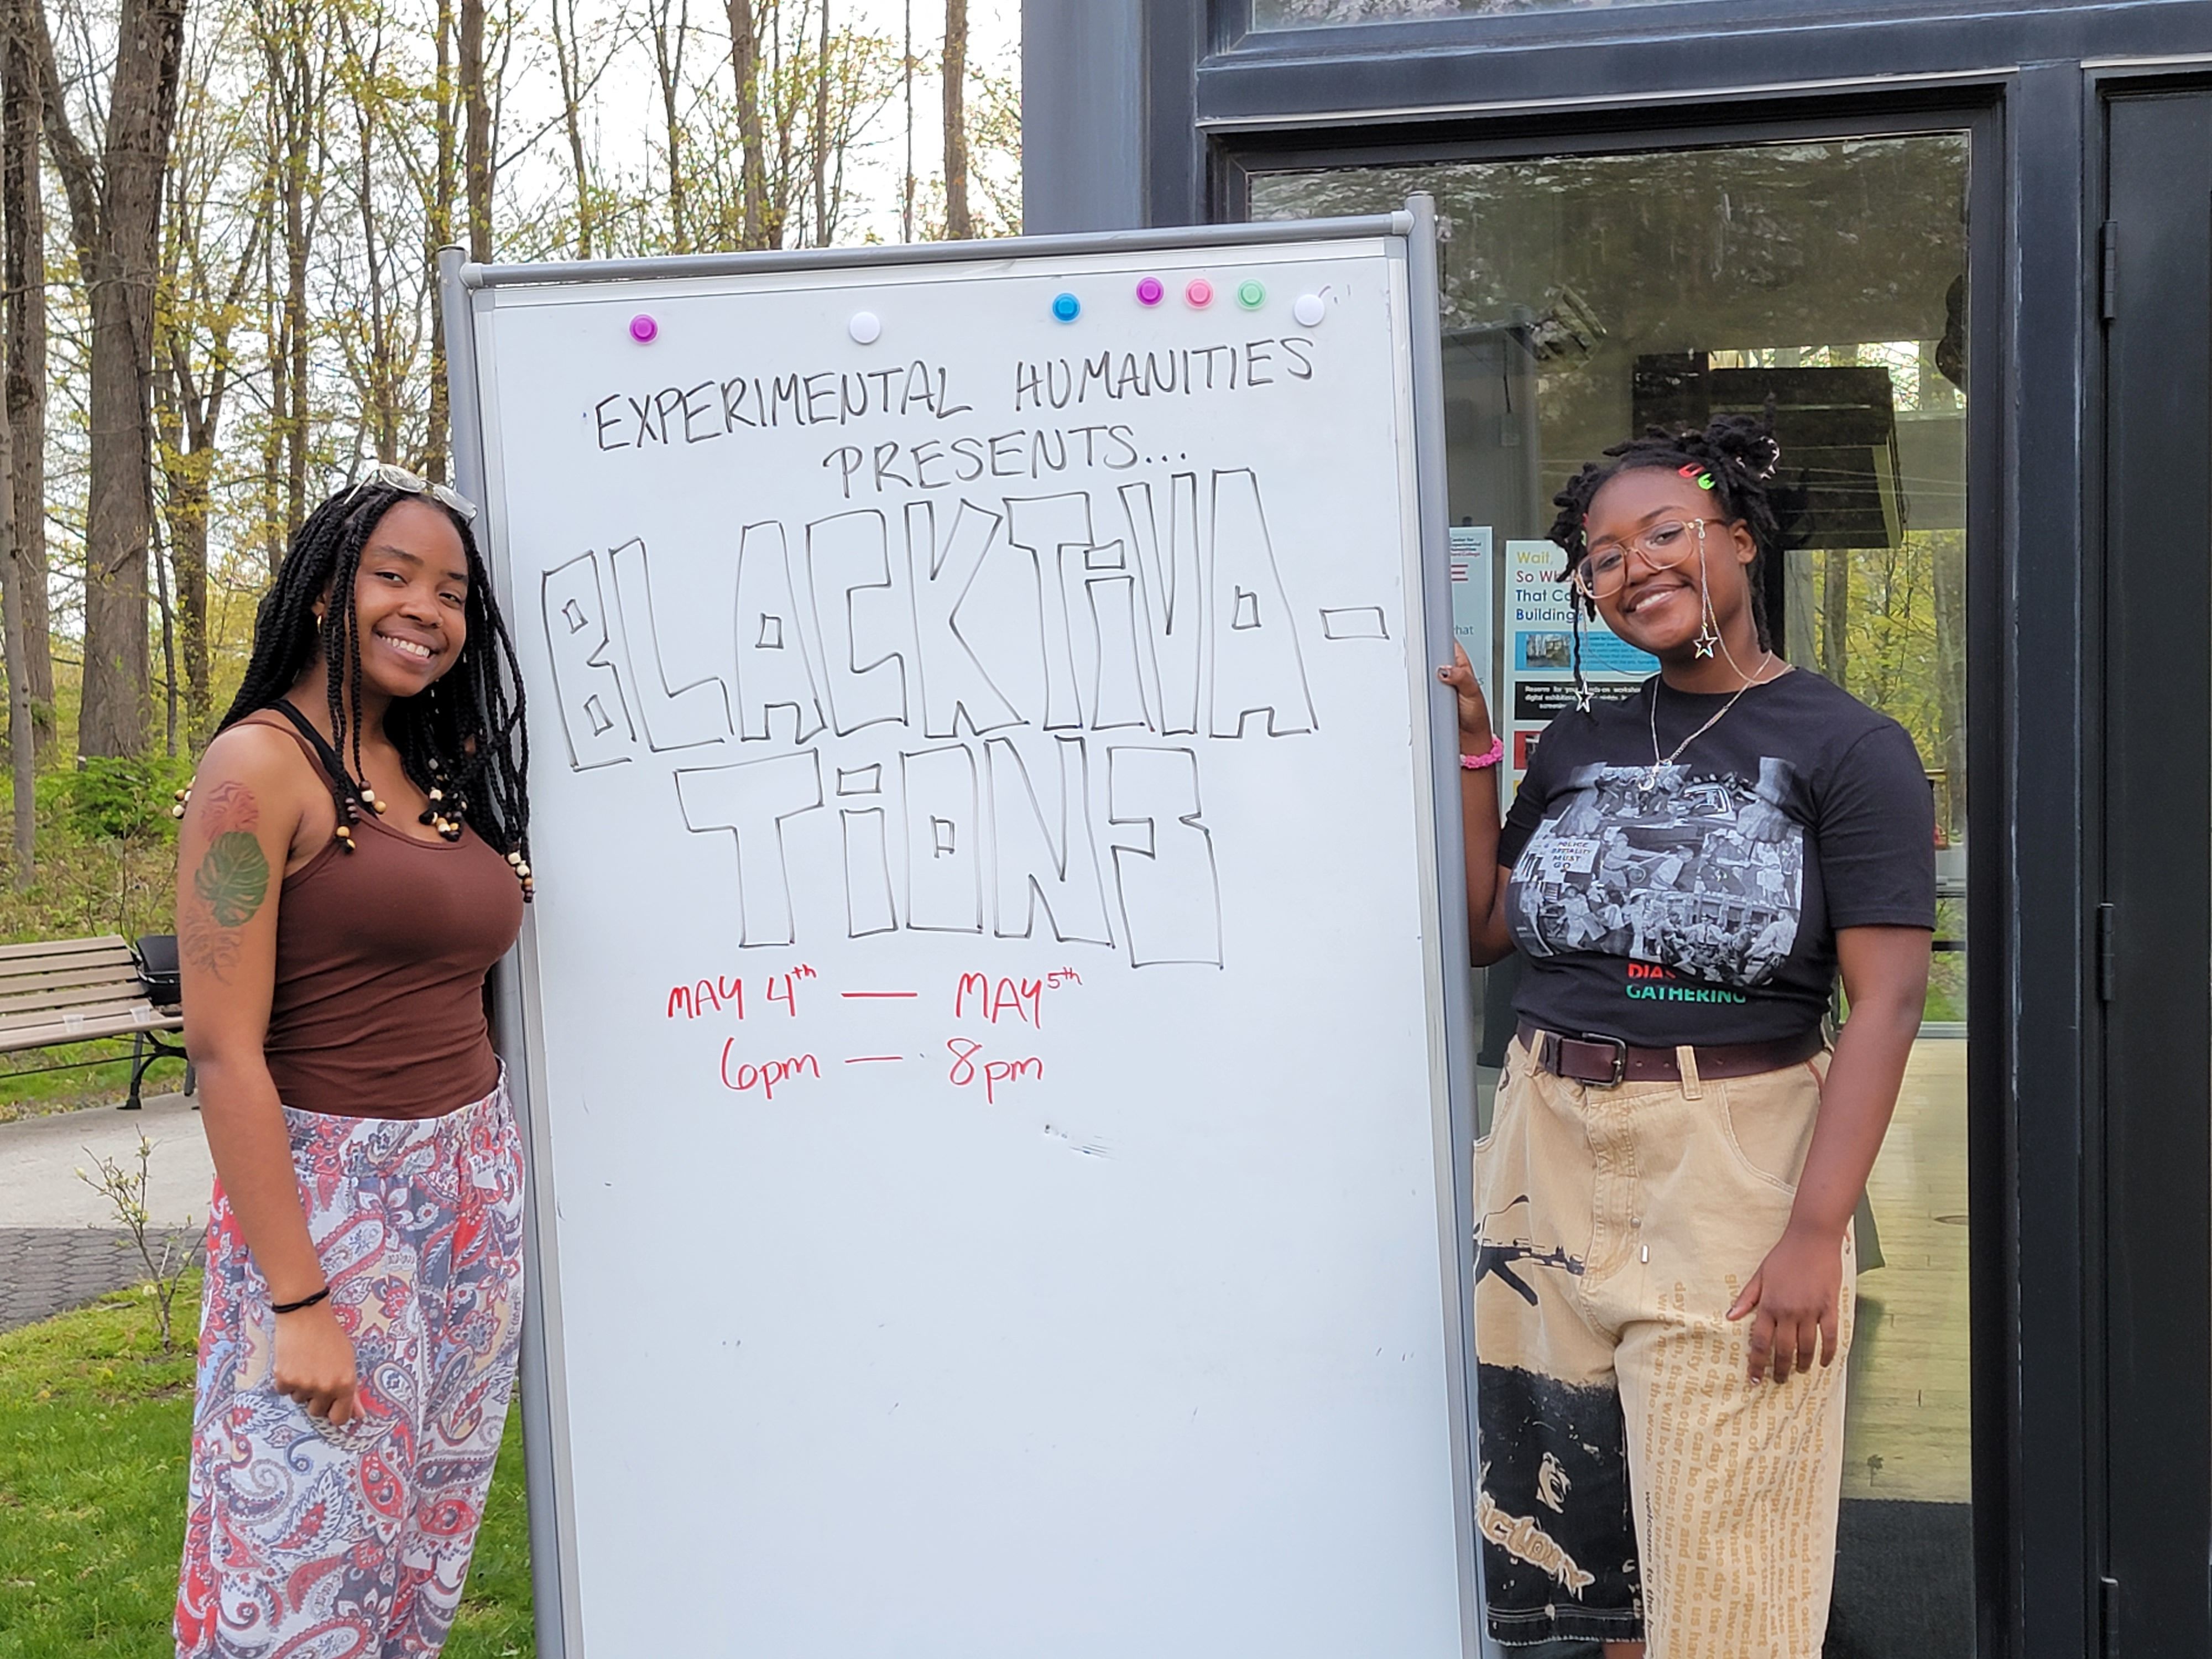 Two Black Imagination student artists with a whiteboard that reads: Experimental Humanities Presents: Blacktivations May 4th- May 5th 6pm-8pm.